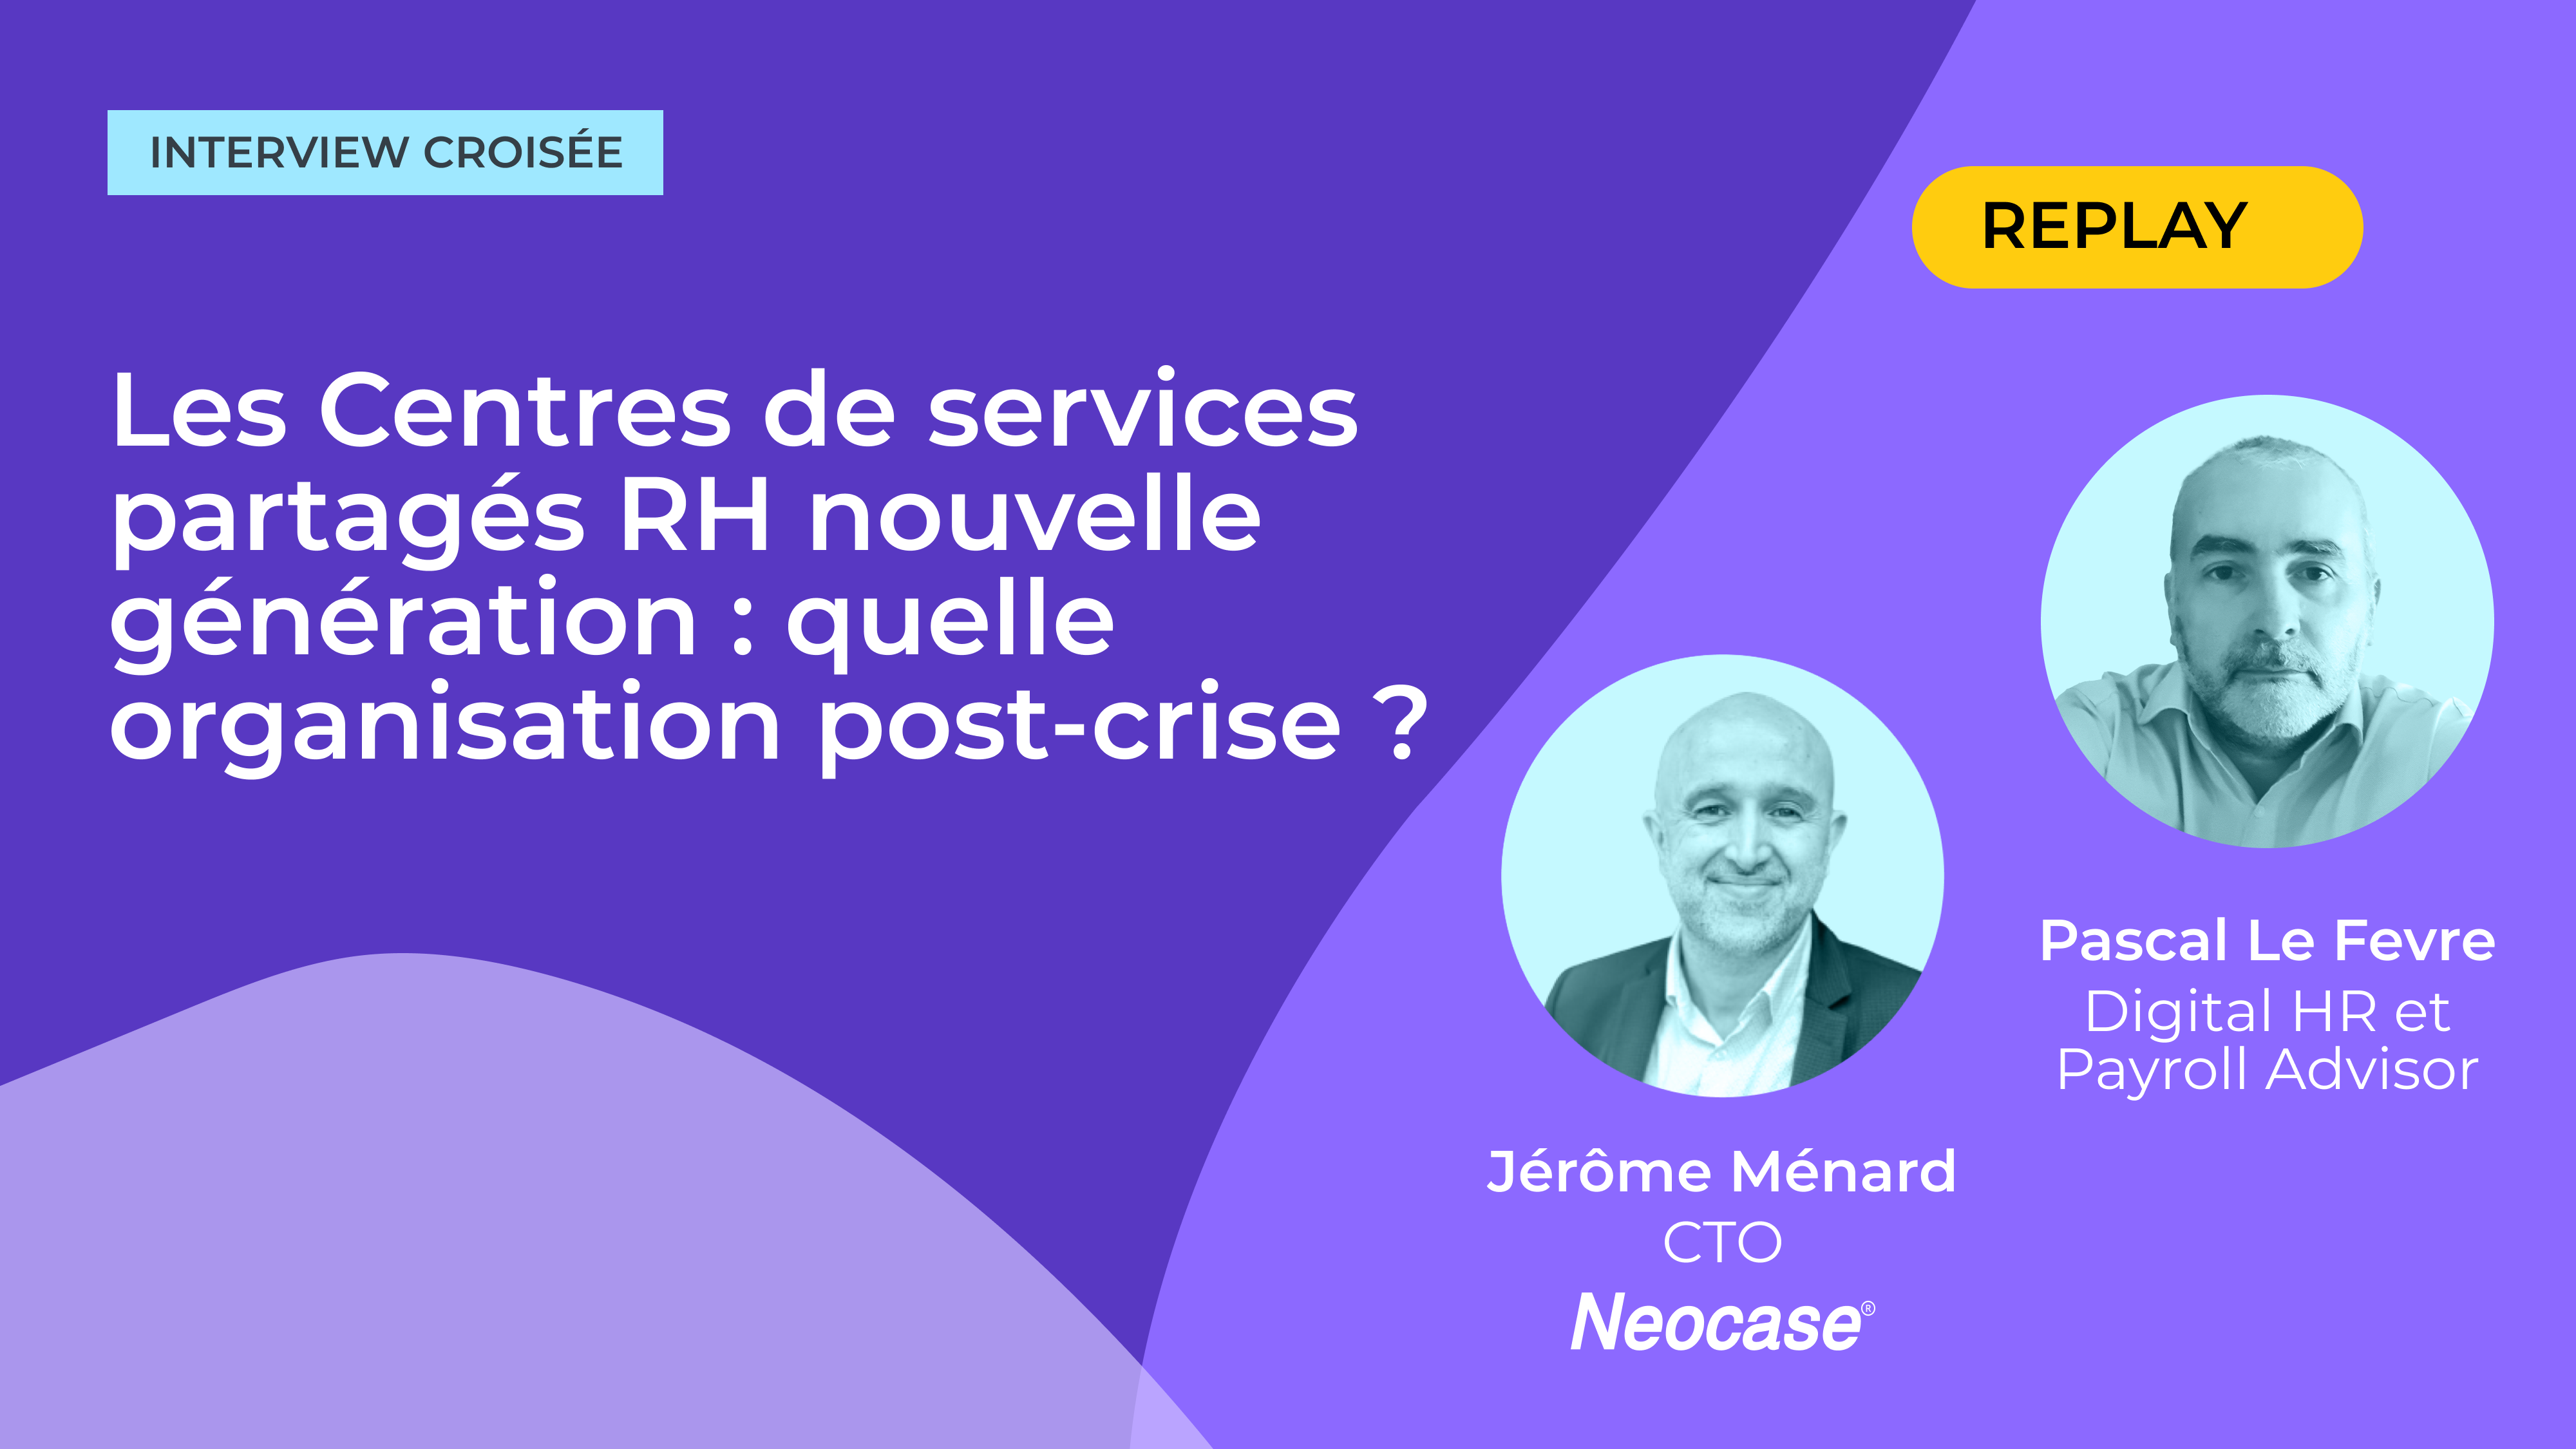 Interview-croisee_CSP-RH-Prospects-EMEA-FR-replay